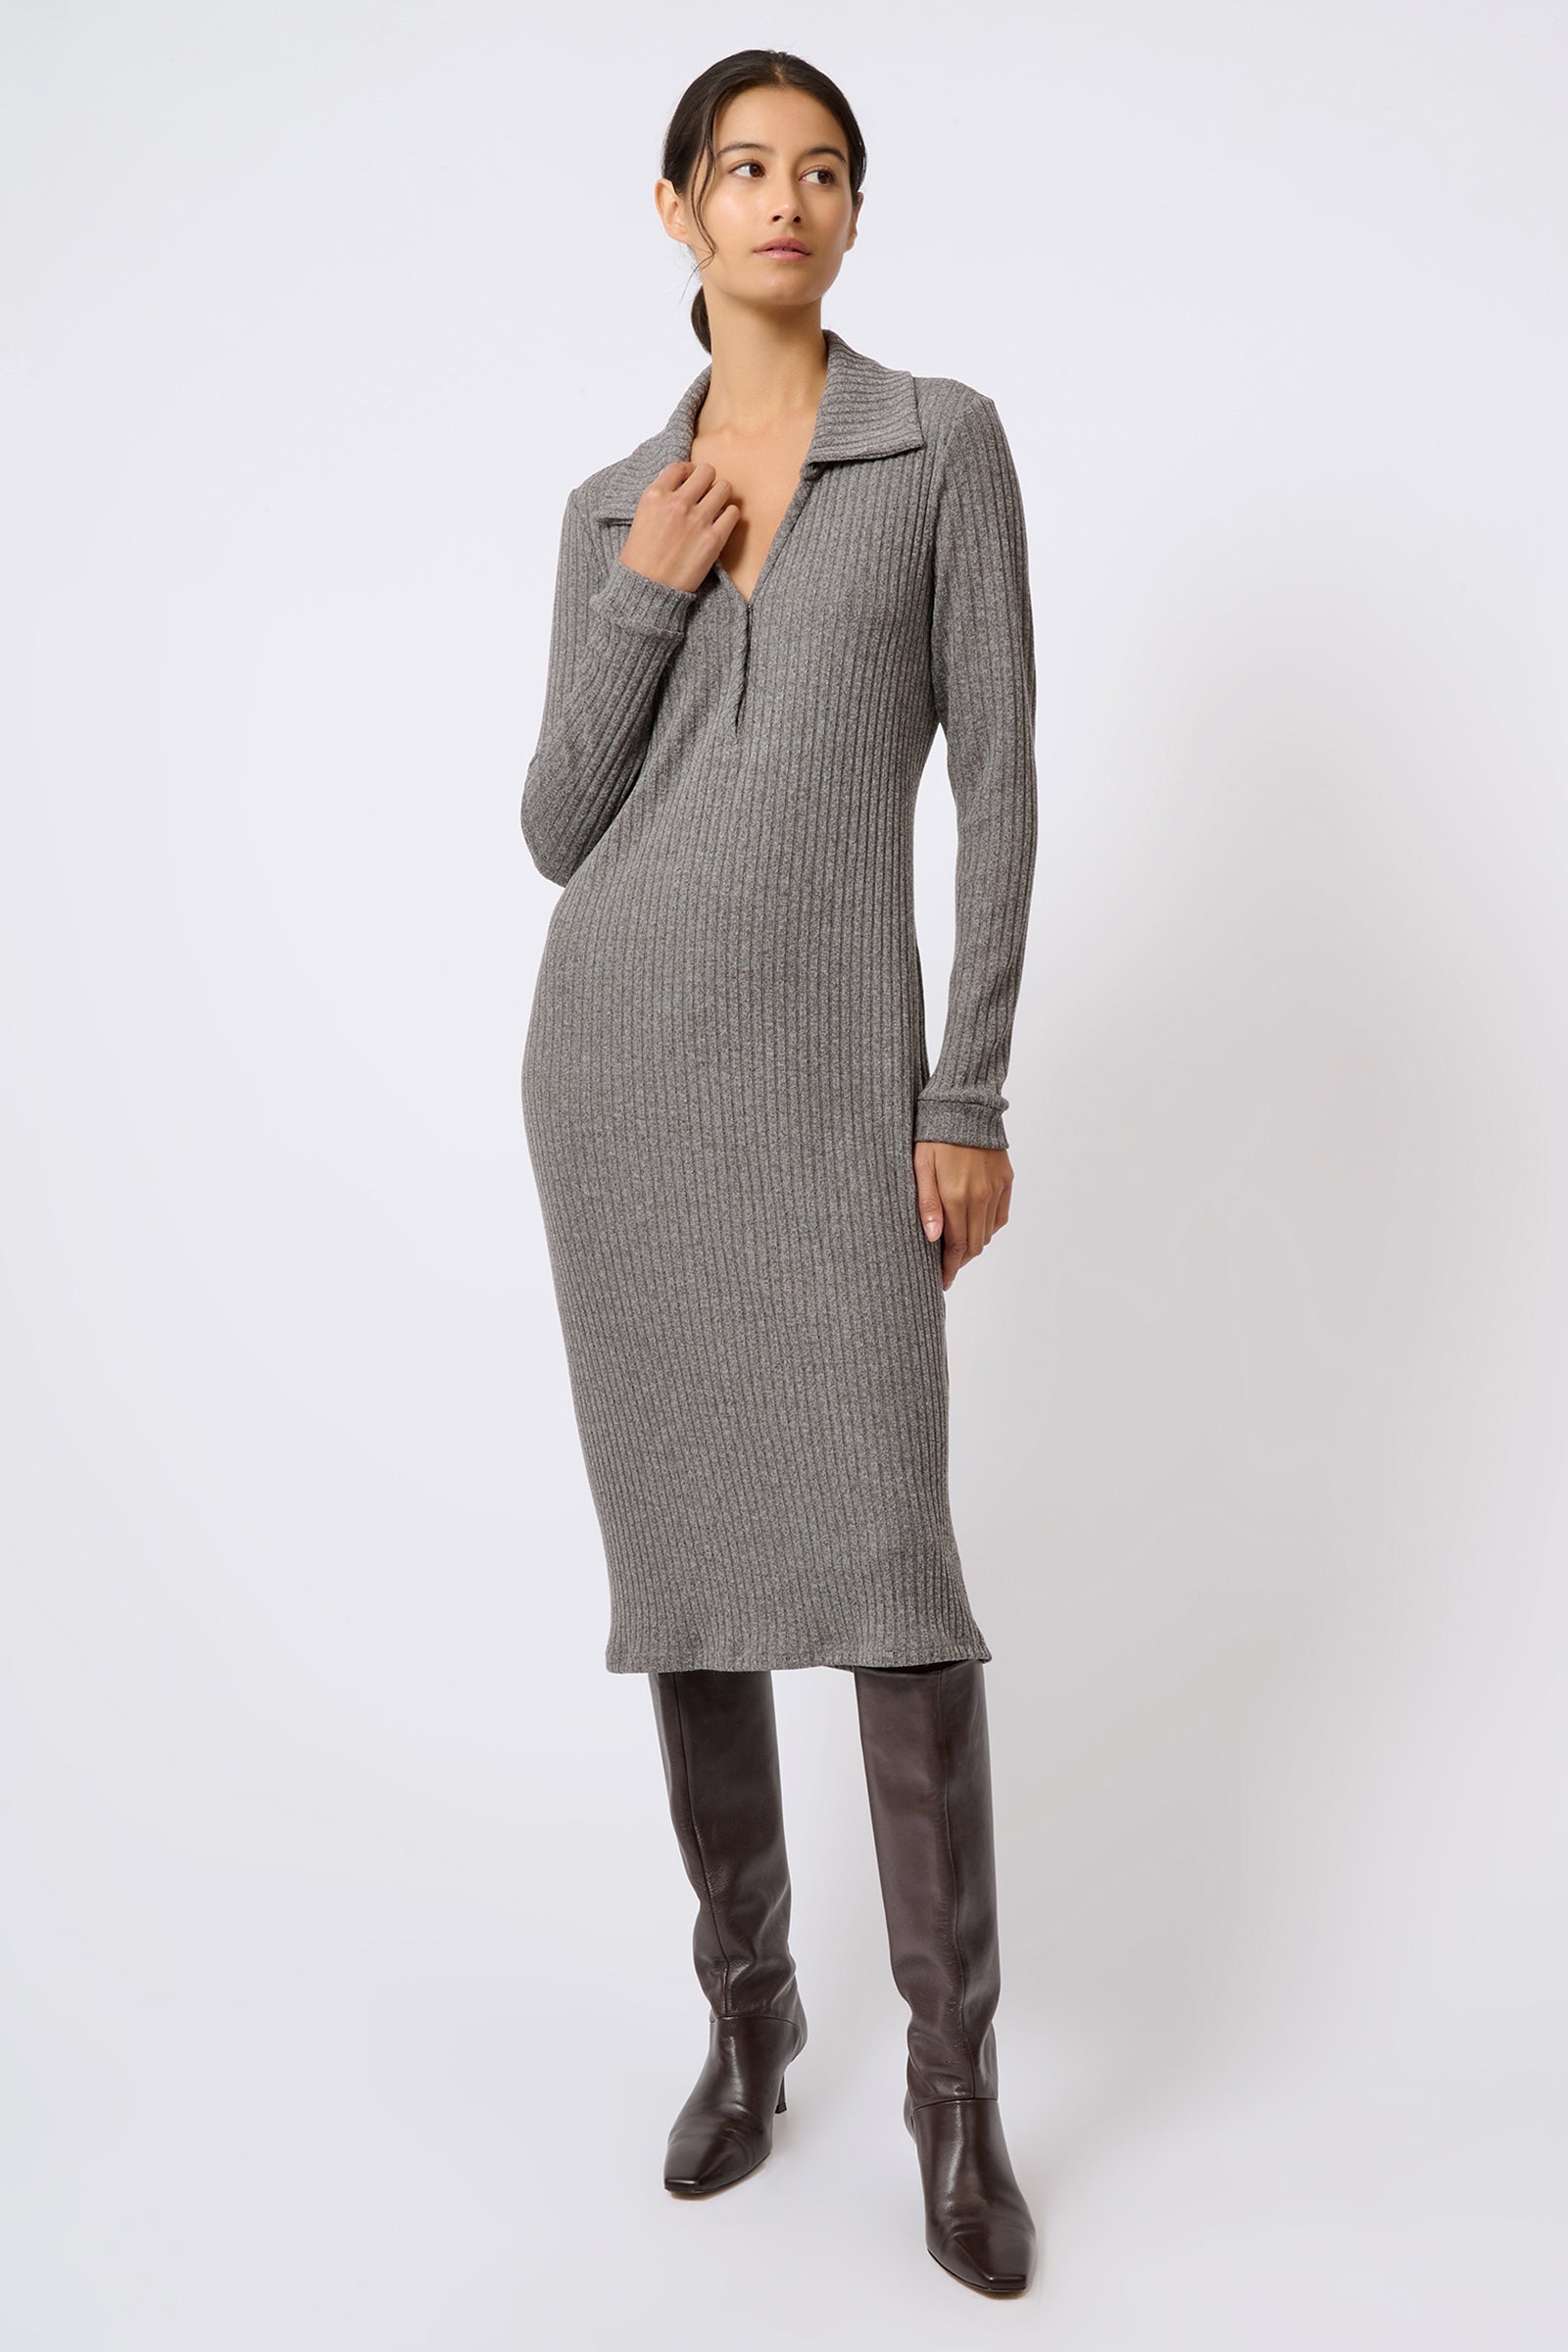 Kal Rieman Audrey Collared Rib Dress in Charcoal on Model with Hand on Collar Full Front View